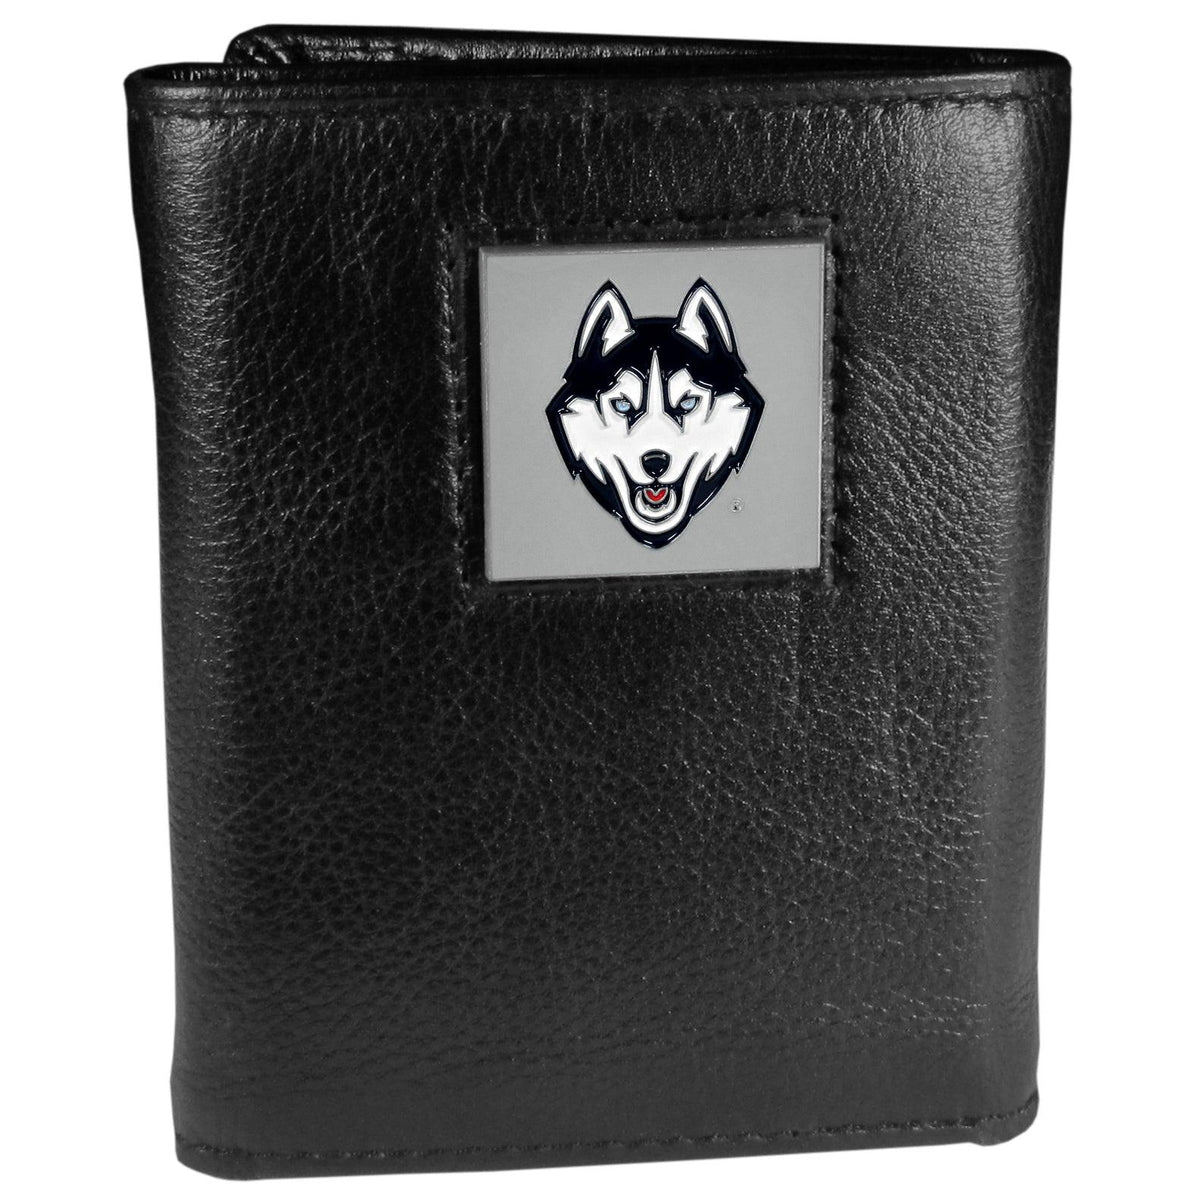 UCONN Huskies Deluxe Leather Tri-fold Wallet Packaged in Gift Box - Flyclothing LLC